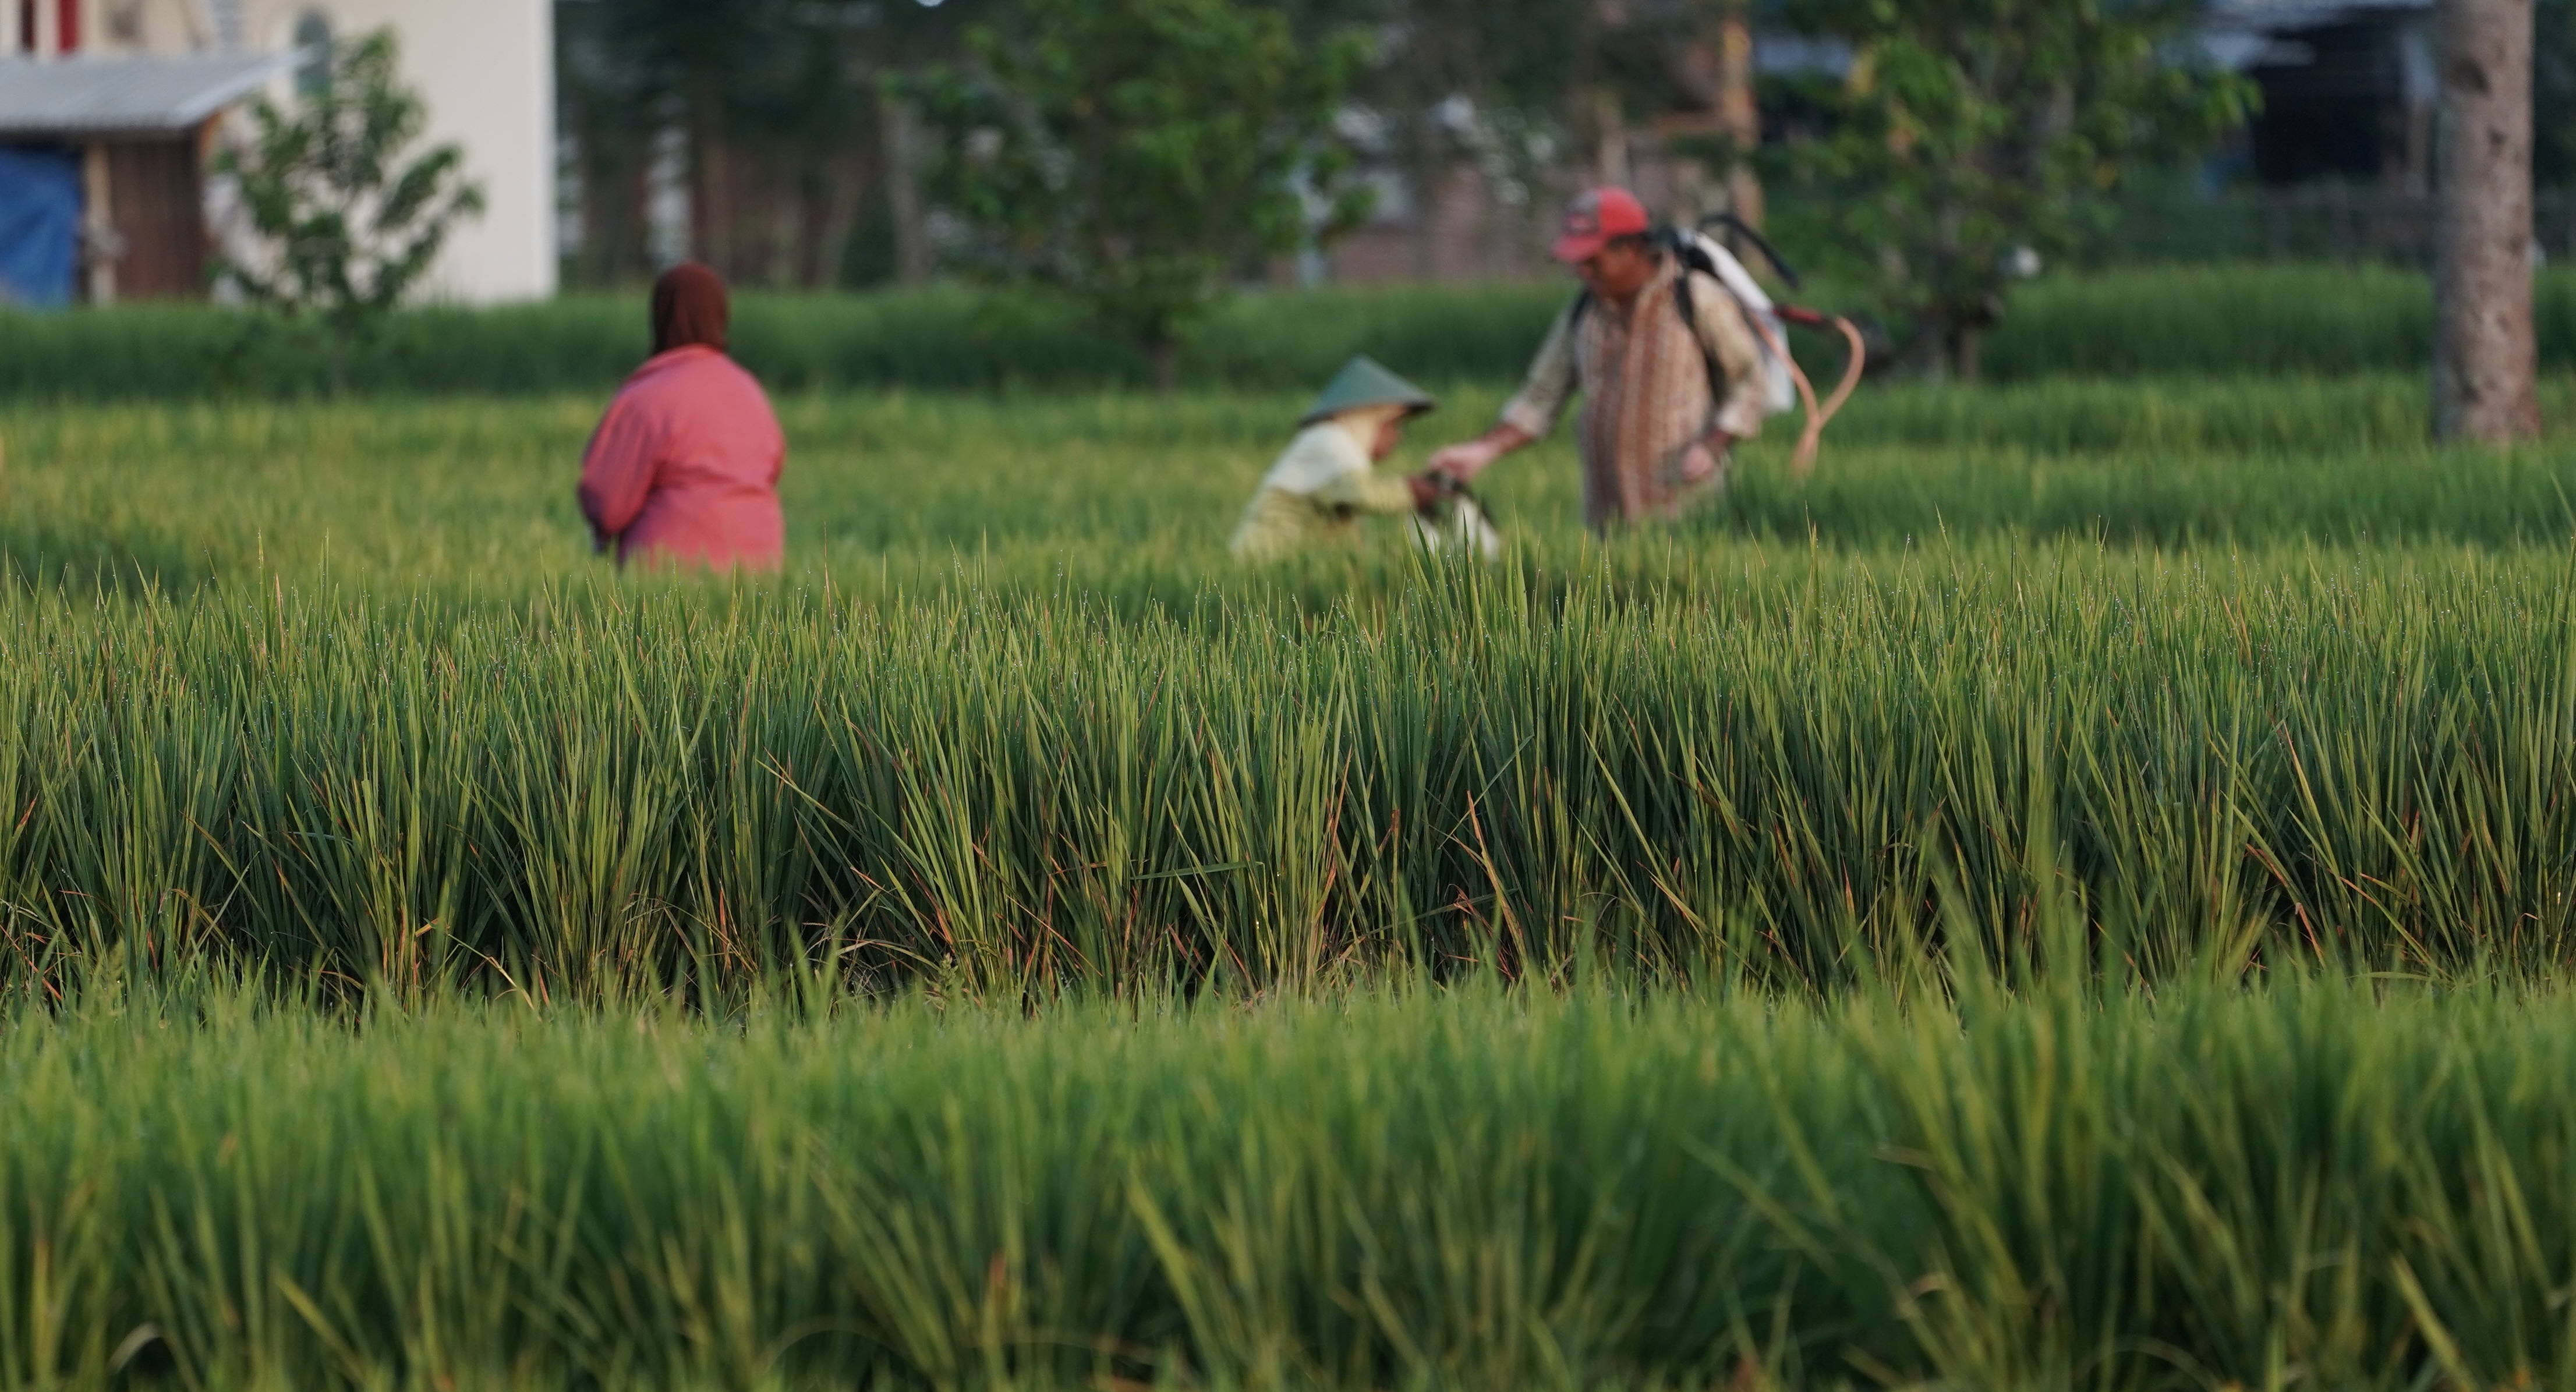 Some of the farmers prepare to work in the middle of their rice fields.